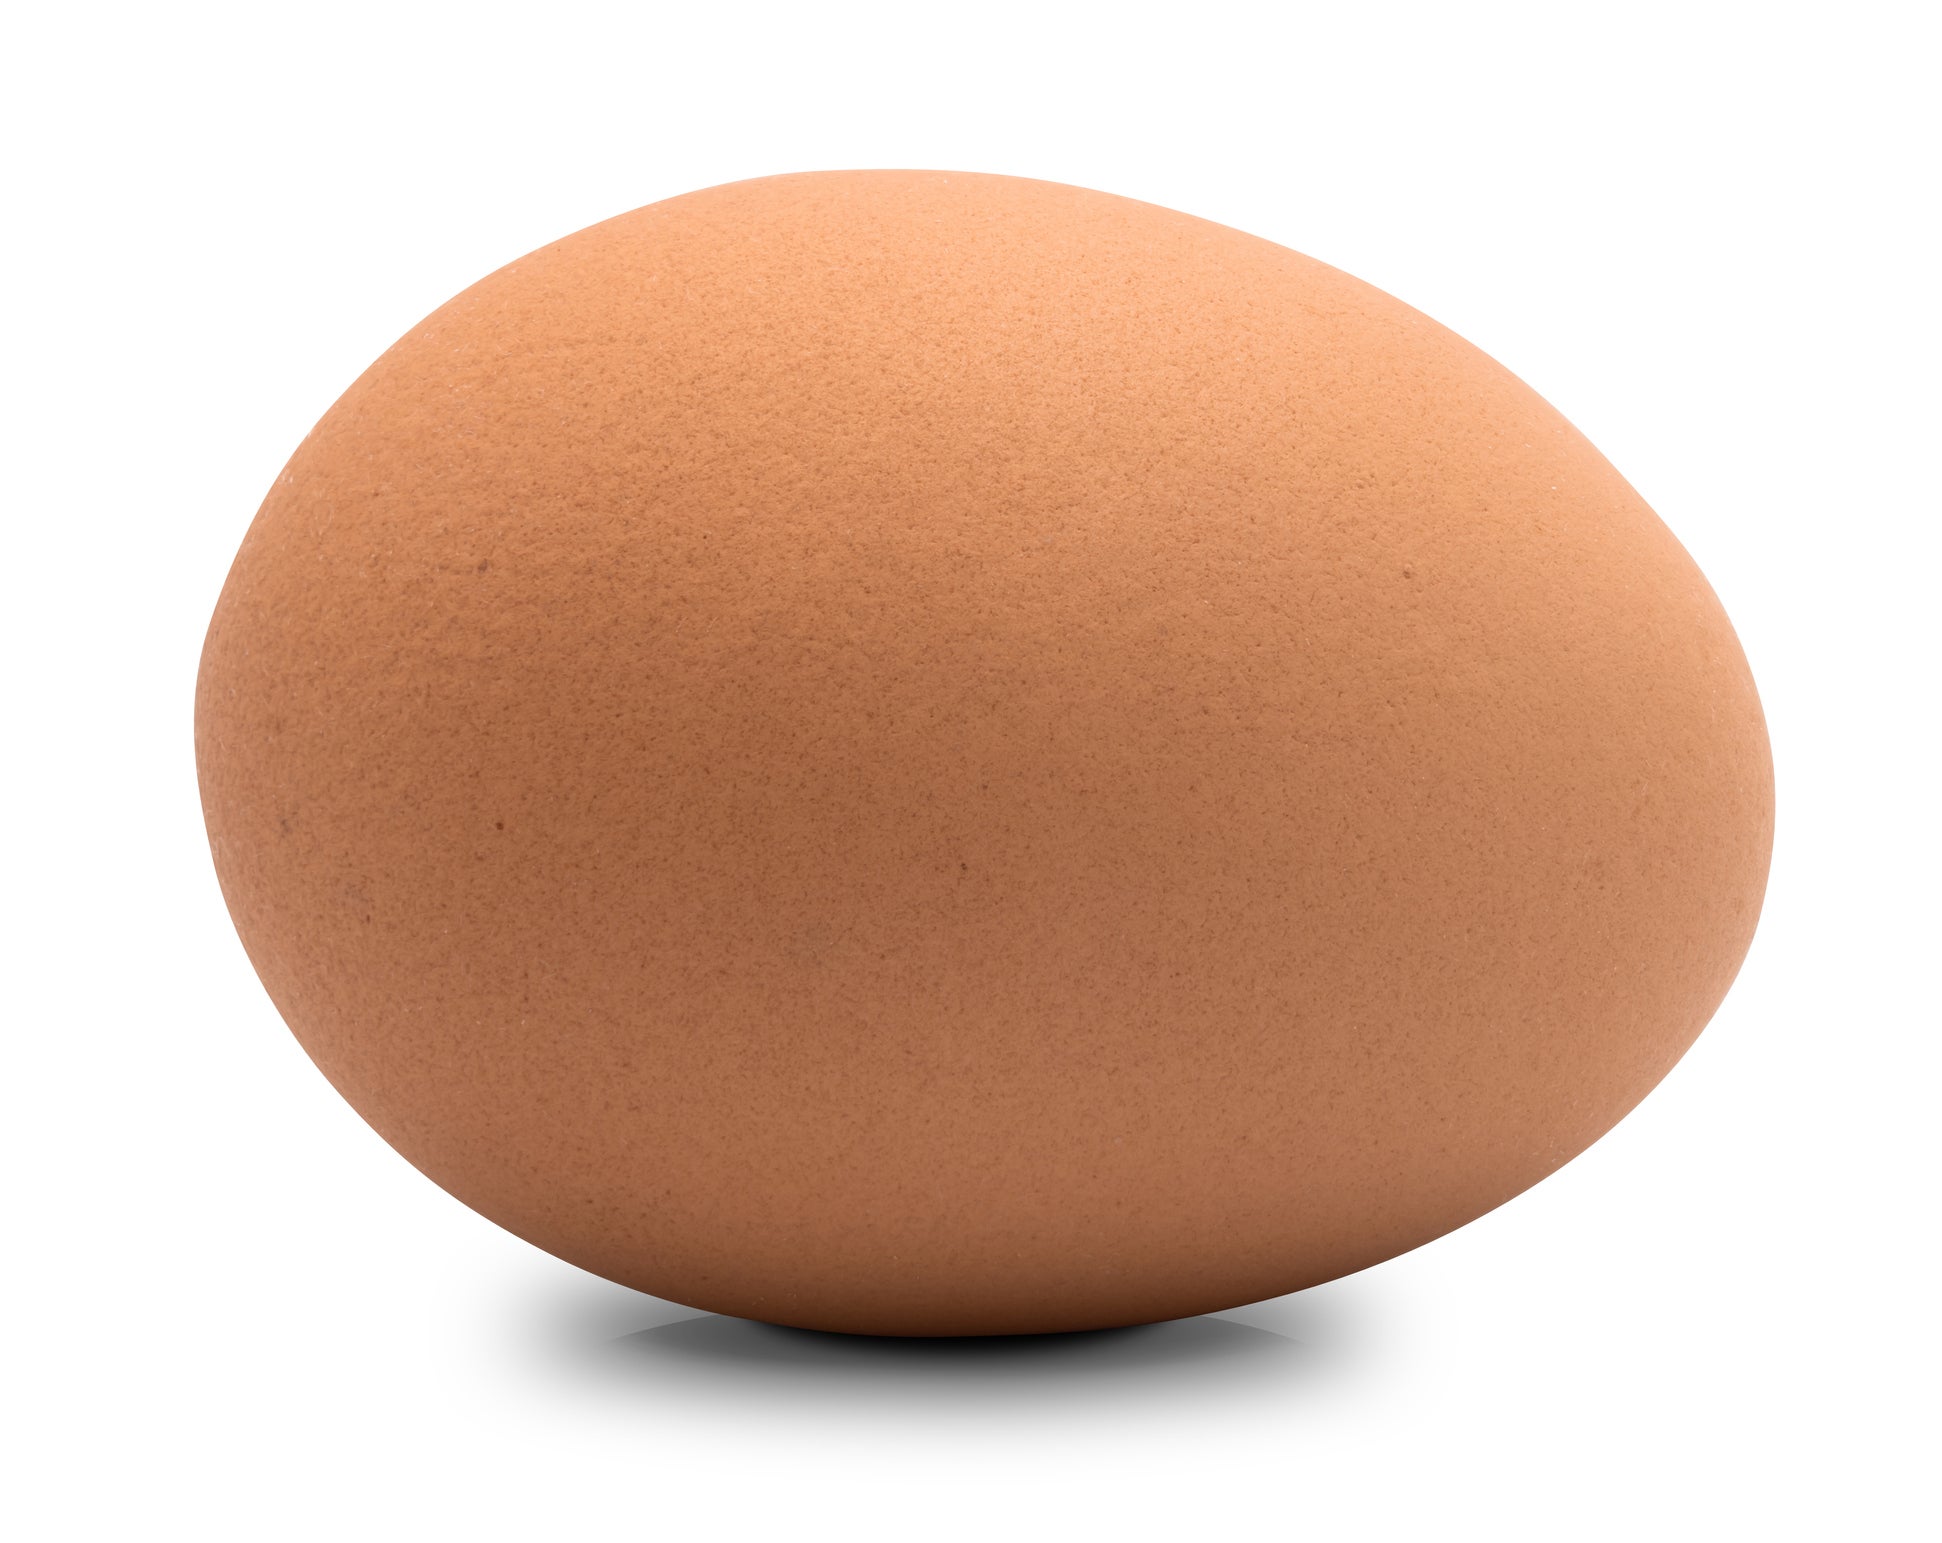 egg with brown shell